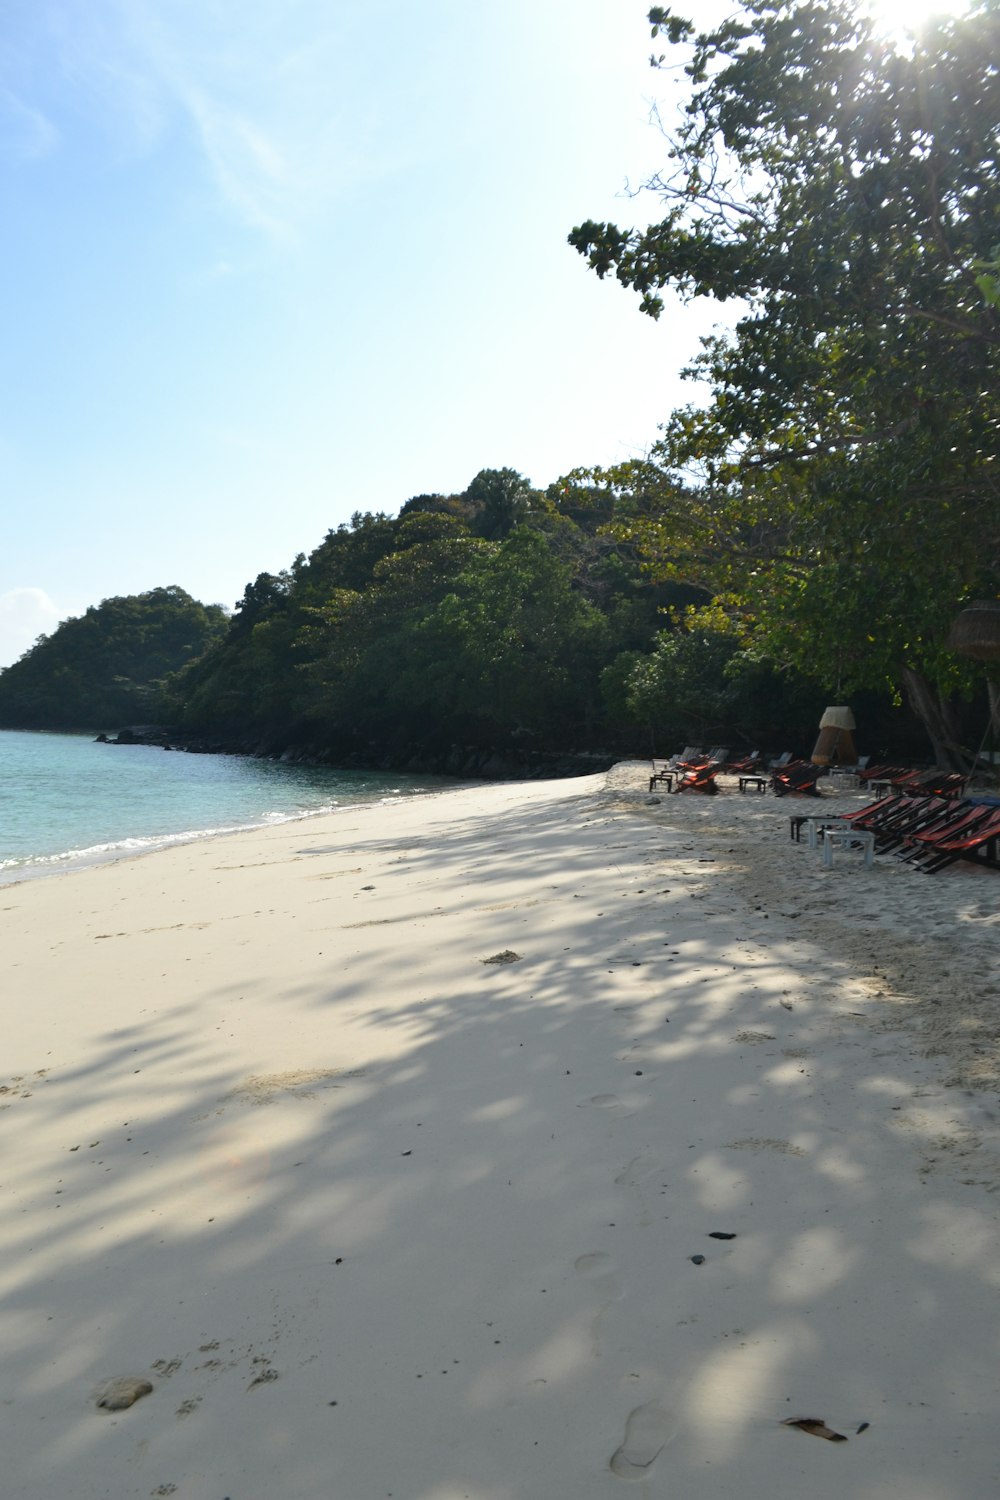 a sandy beach with lounge chairs and trees